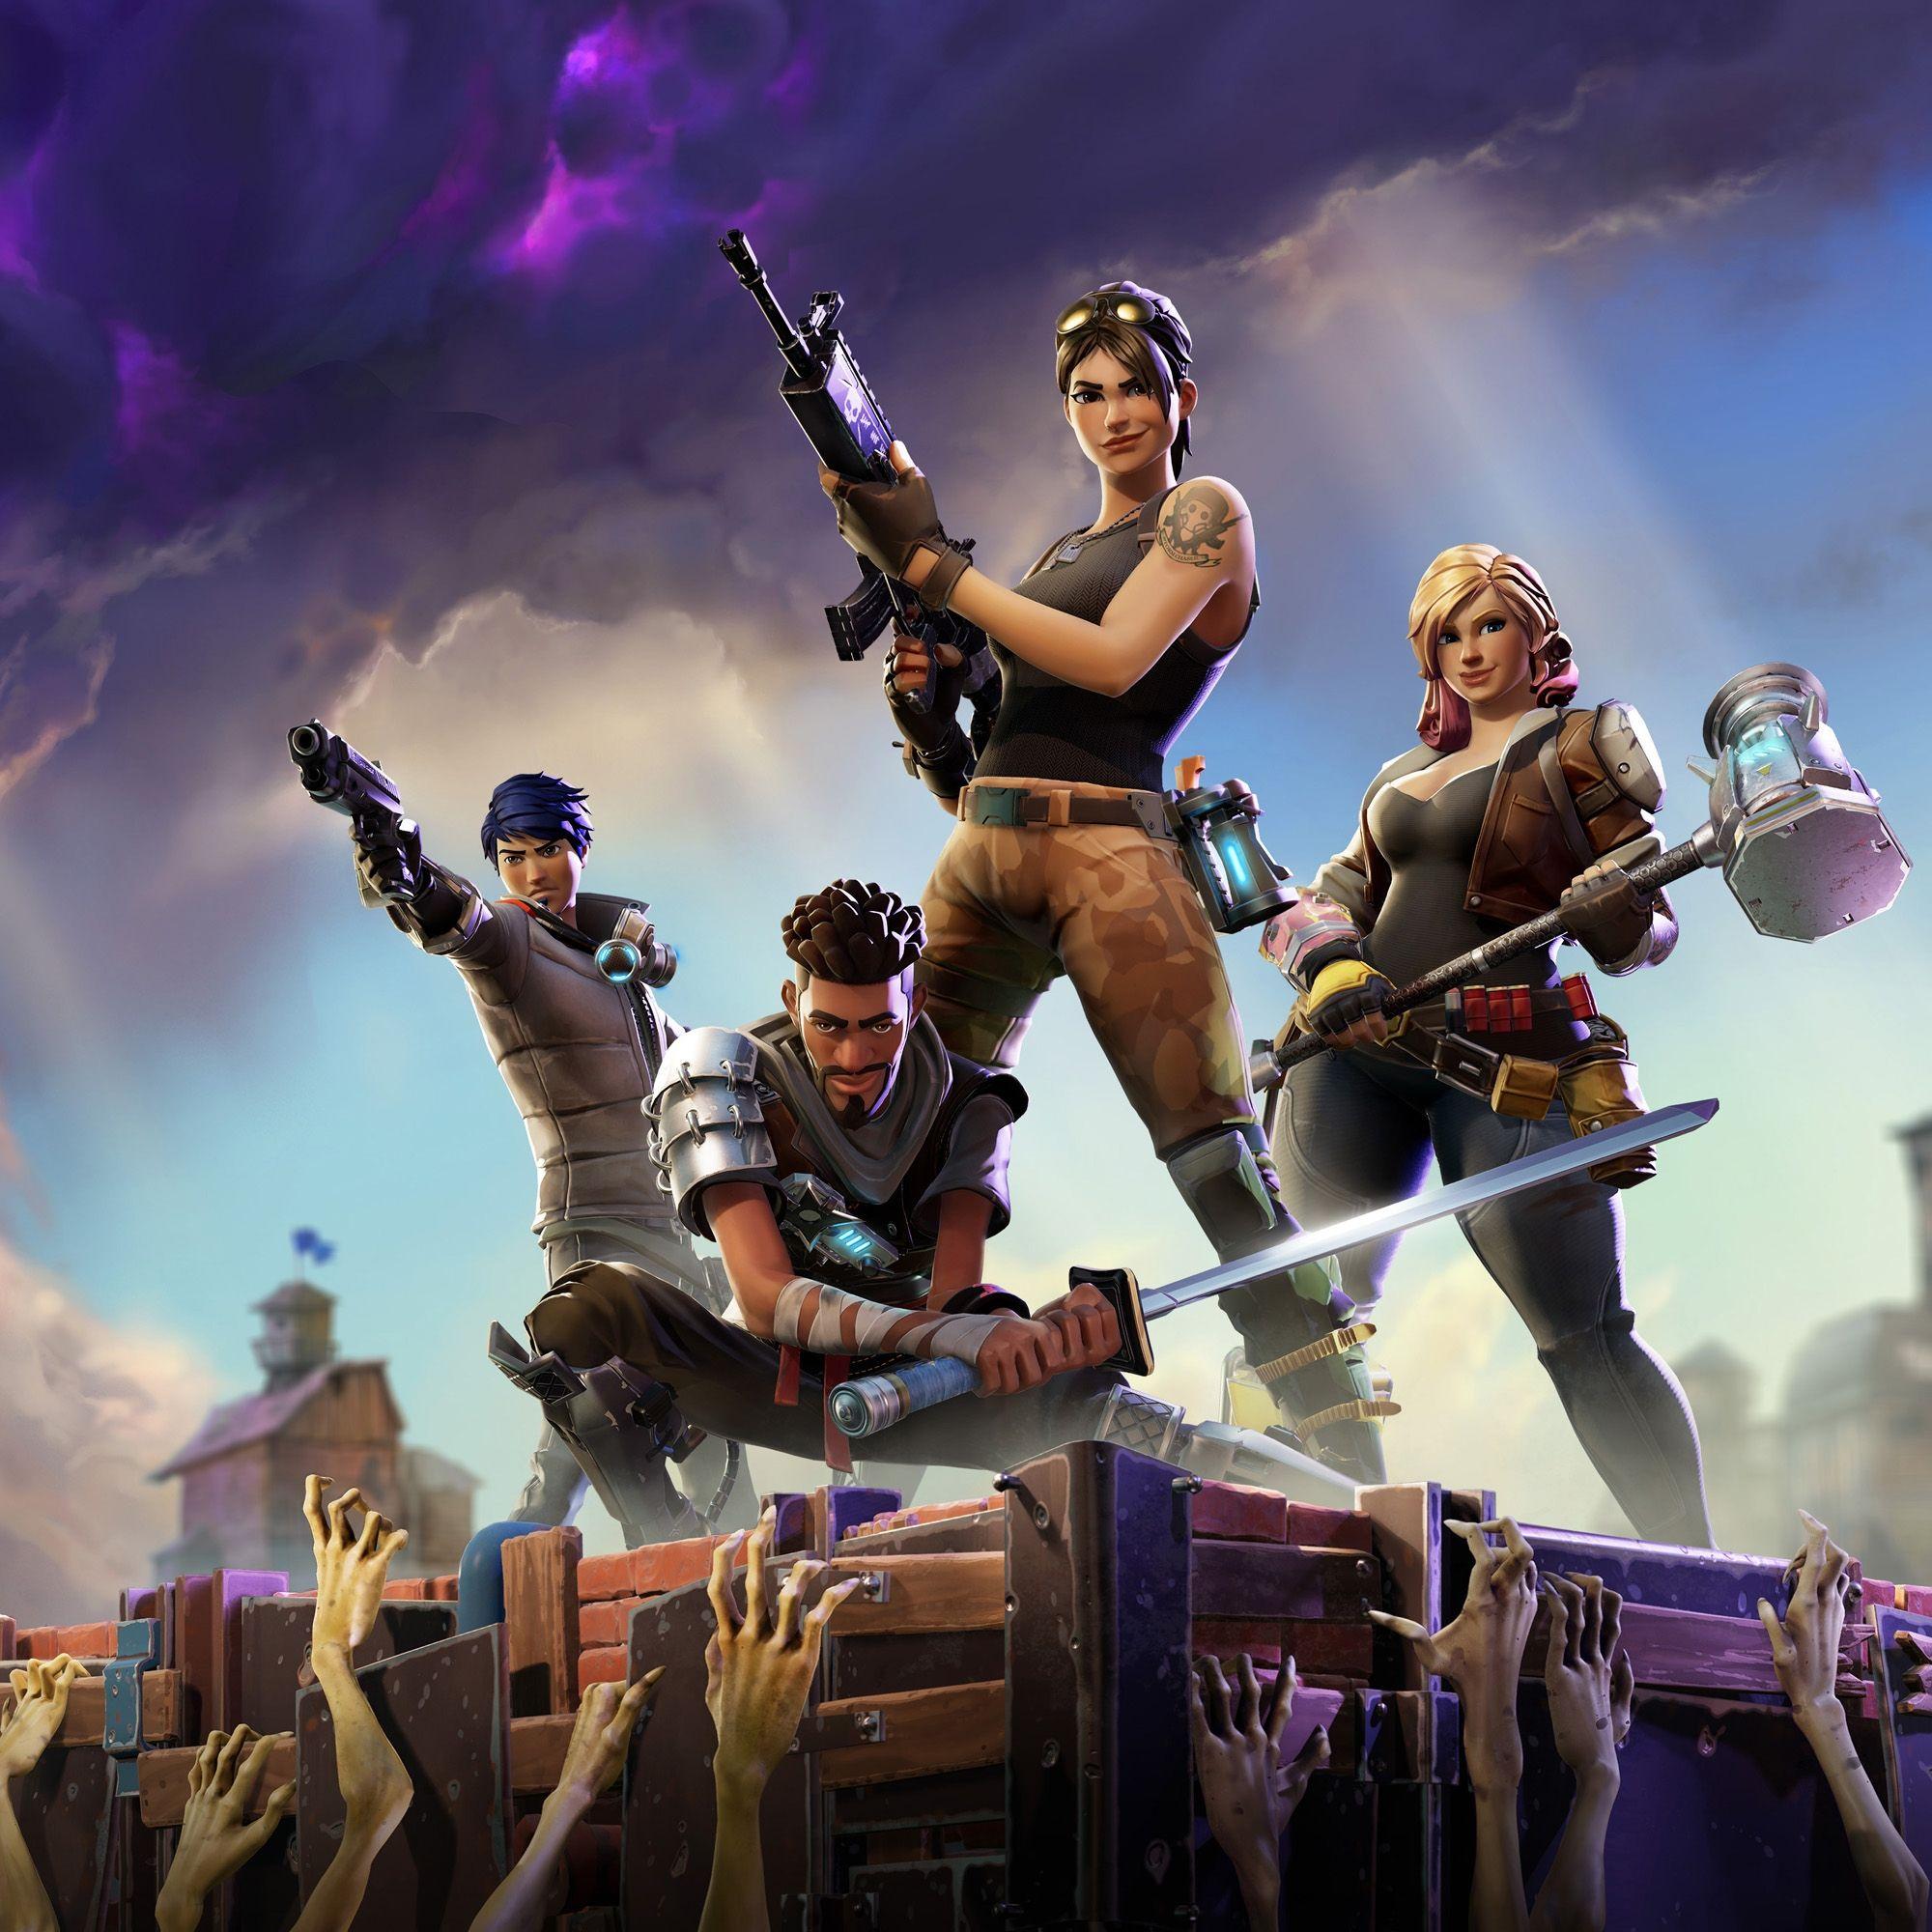 Fortnite Game Wallpapers Top Free Fortnite Game Backgrounds Wallpaperaccess By downloading fortnite game wallpapers hd app you'll get a huge collection of fortnite wallpapers to use them in your mobiles or tablets. fortnite game wallpapers top free